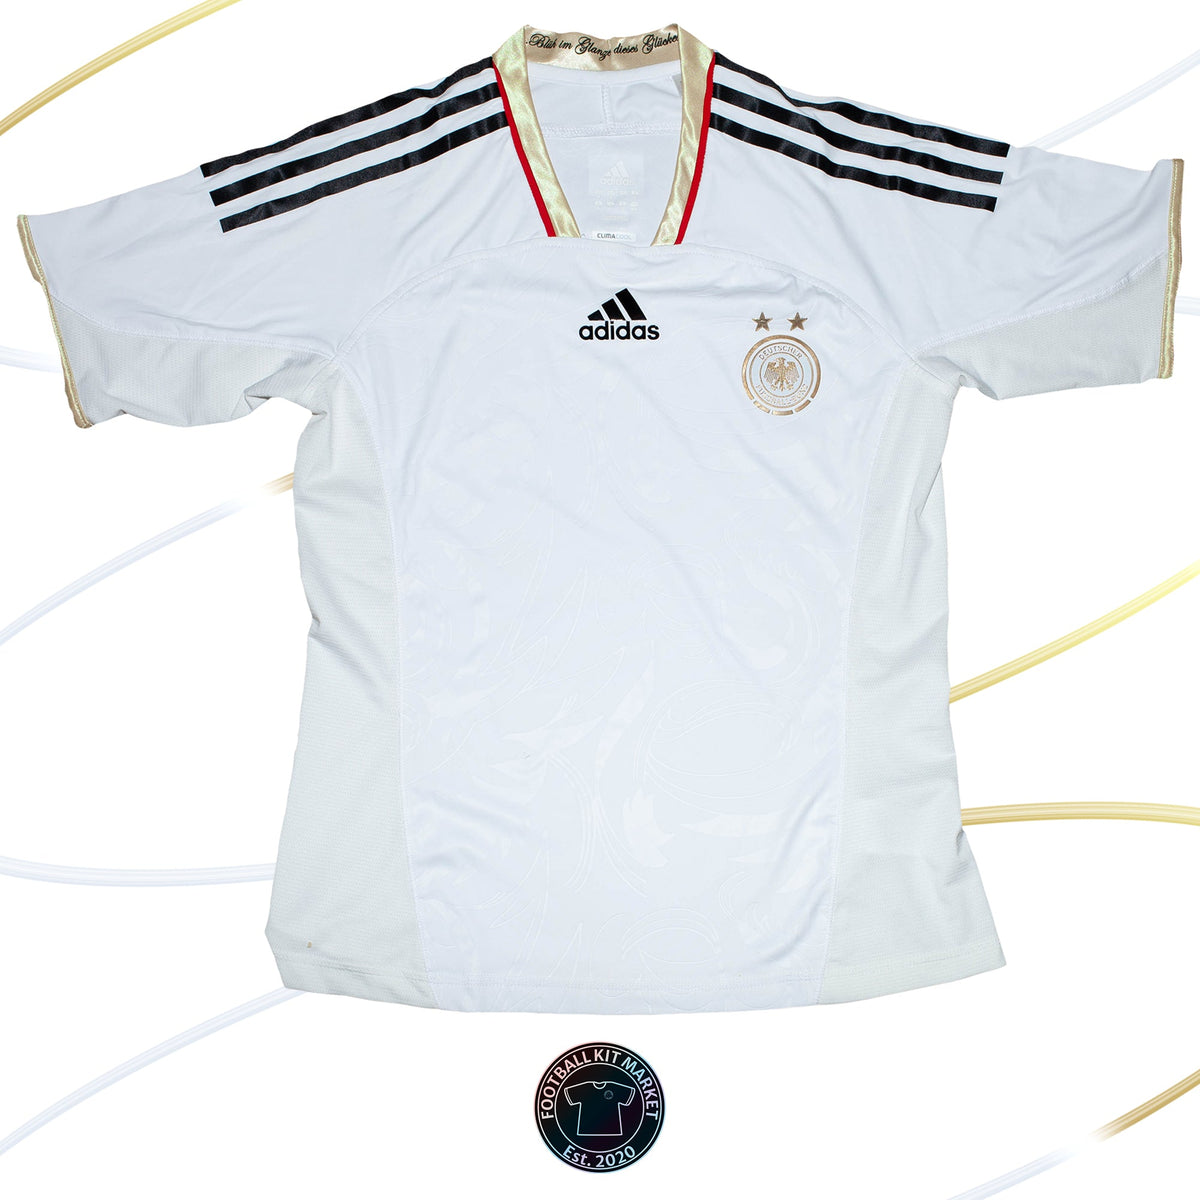 Genuine GERMANY Home Shirt (2012) - ADIDAS (Women's M) - Product Image from Football Kit Market